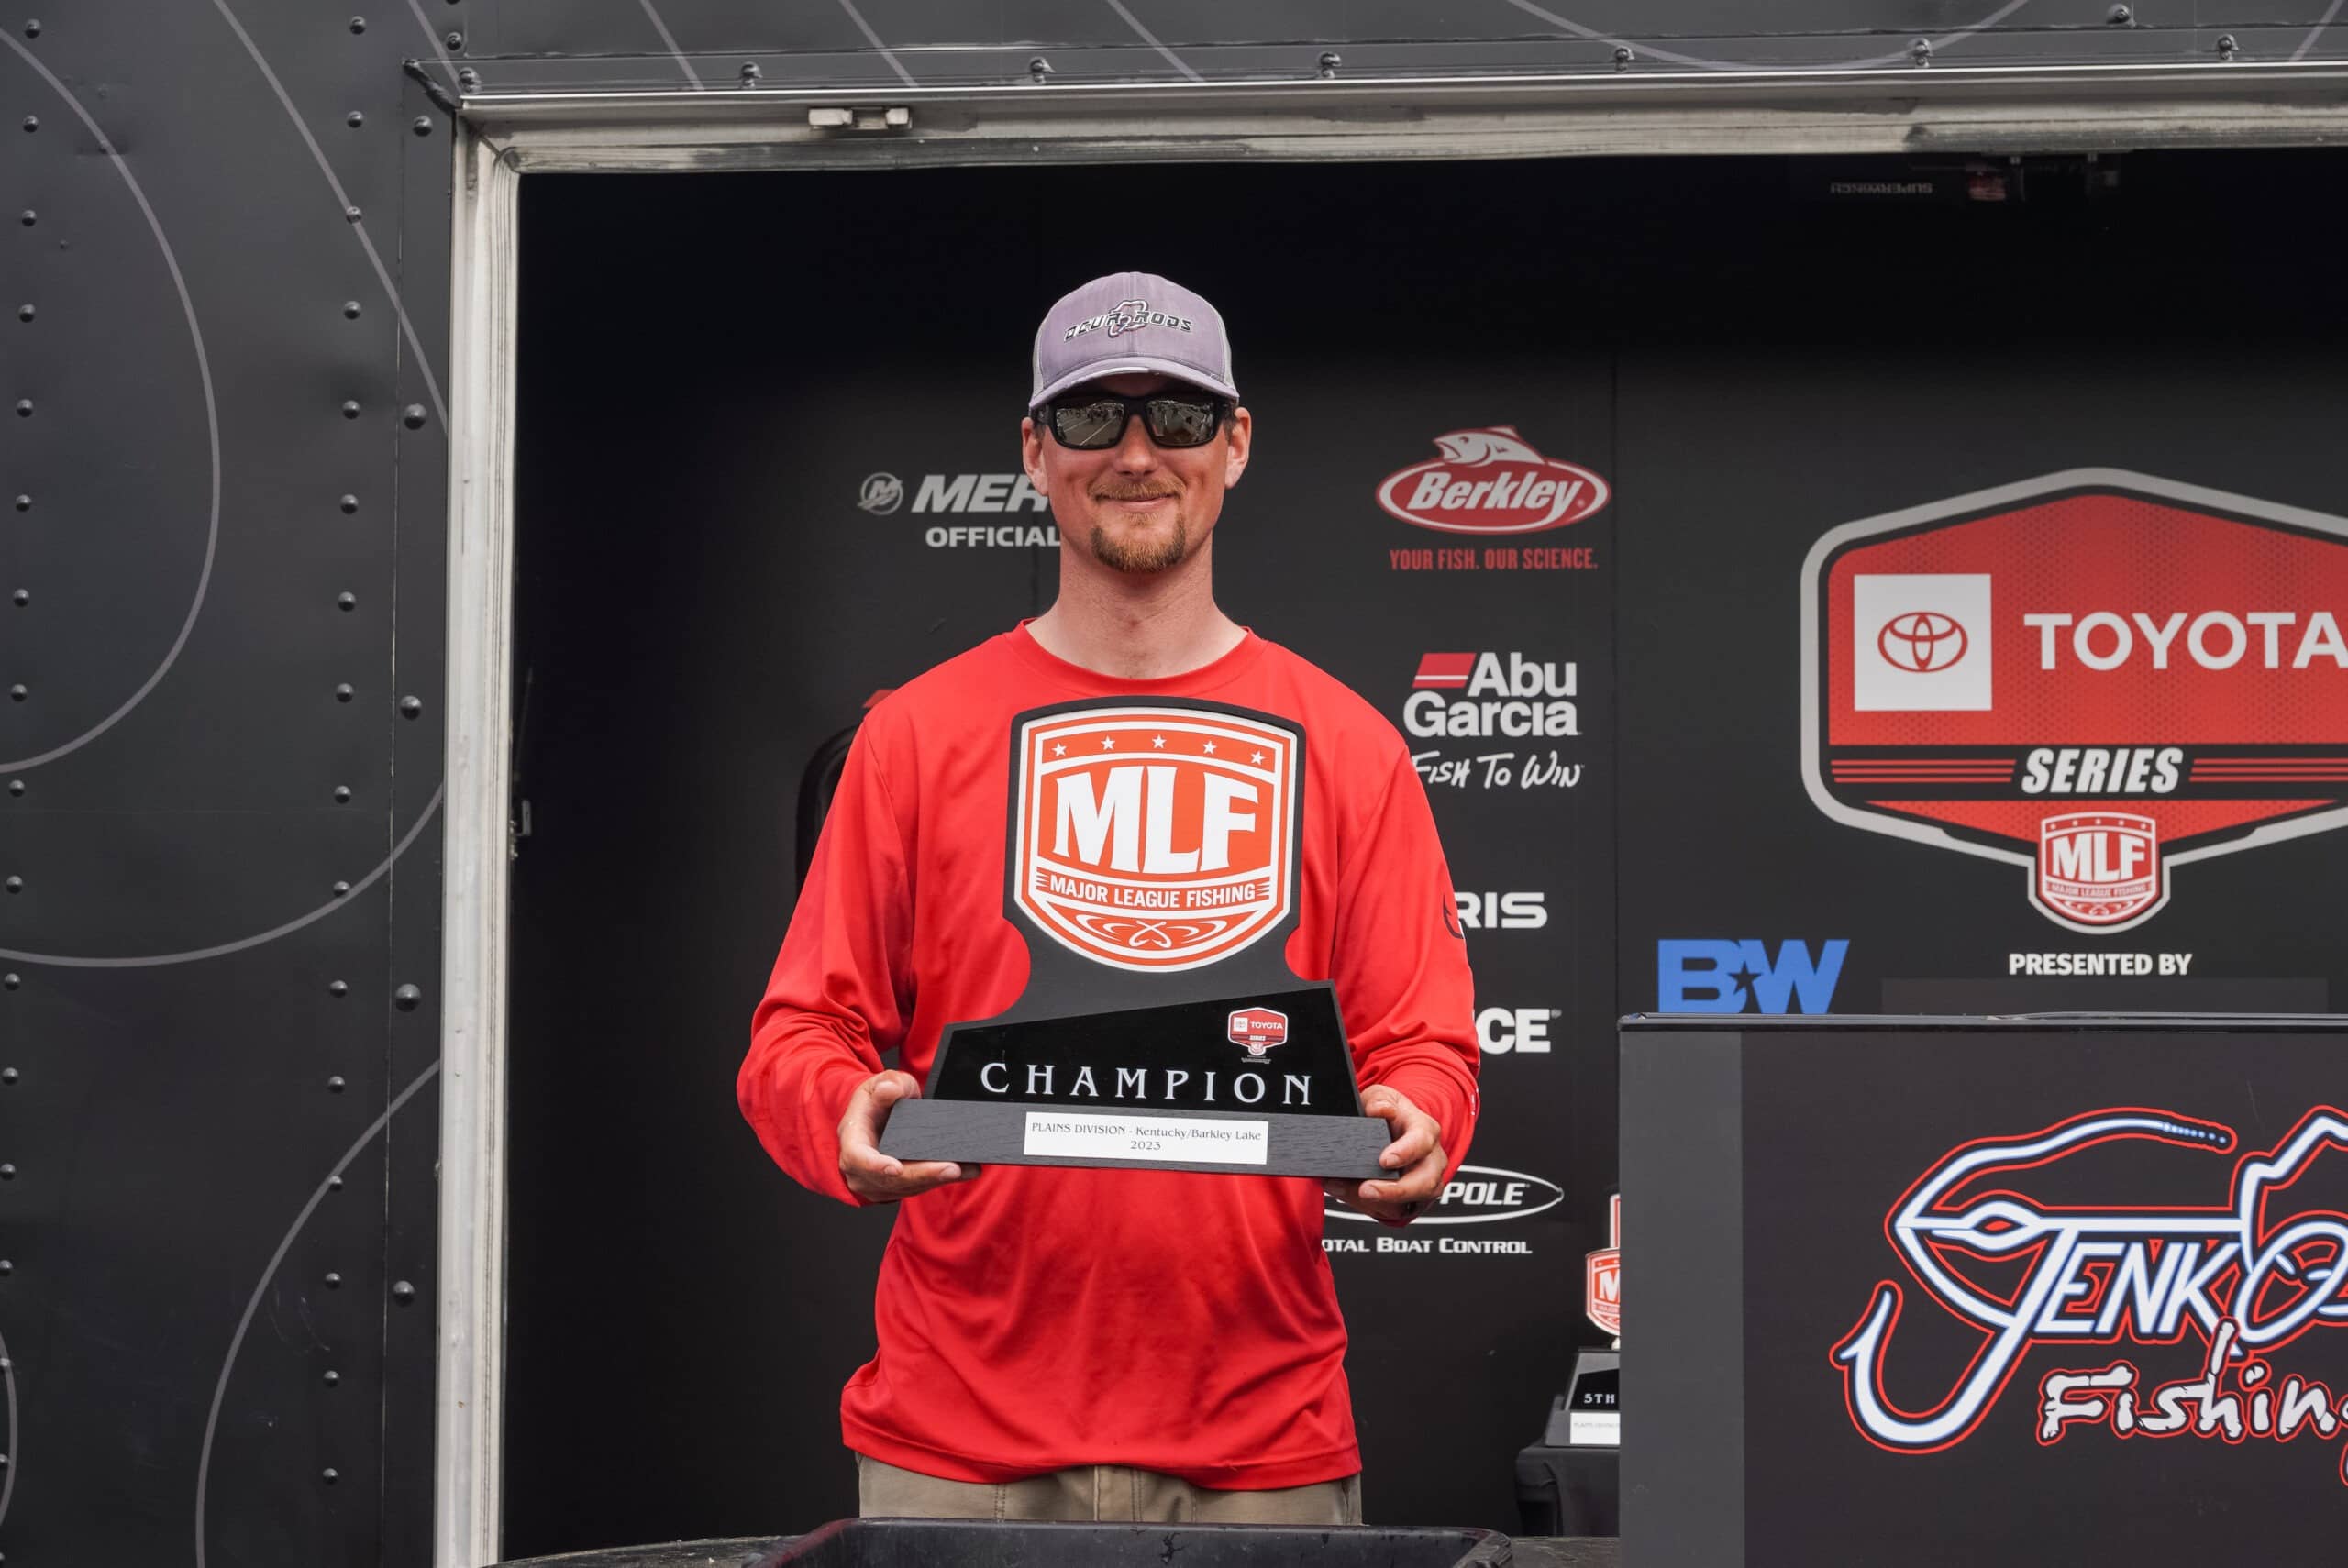 Jake Lawrence Leads Wire-to-Wire with Smallmouth, Wins MLF Toyota Series at  Kentucky and Barkley Lakes Presented by Jenko Fishing